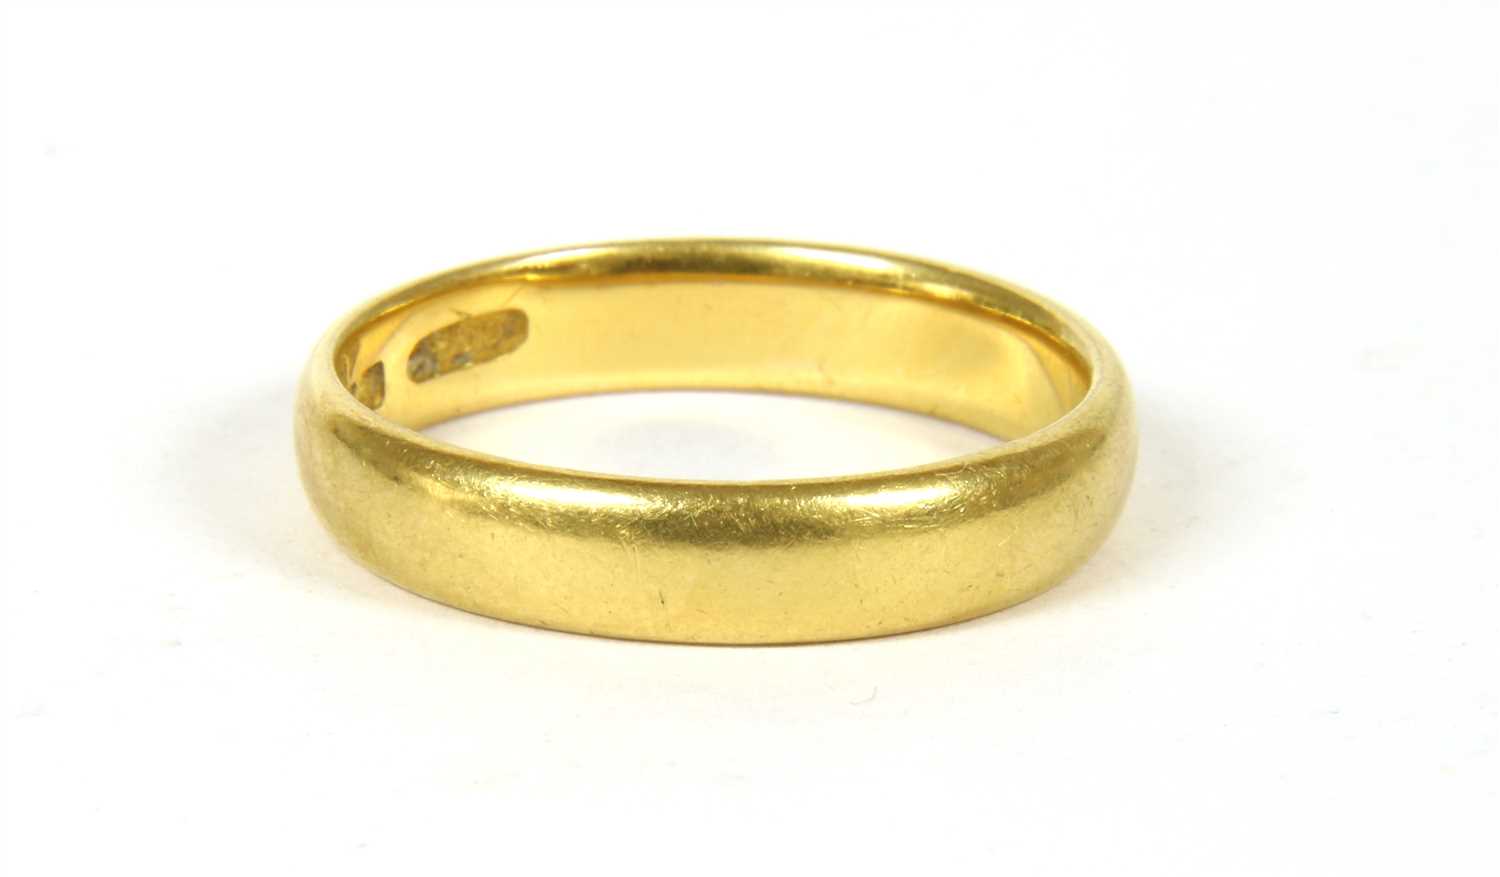 Lot 1066 - A 22ct gold wedding ring